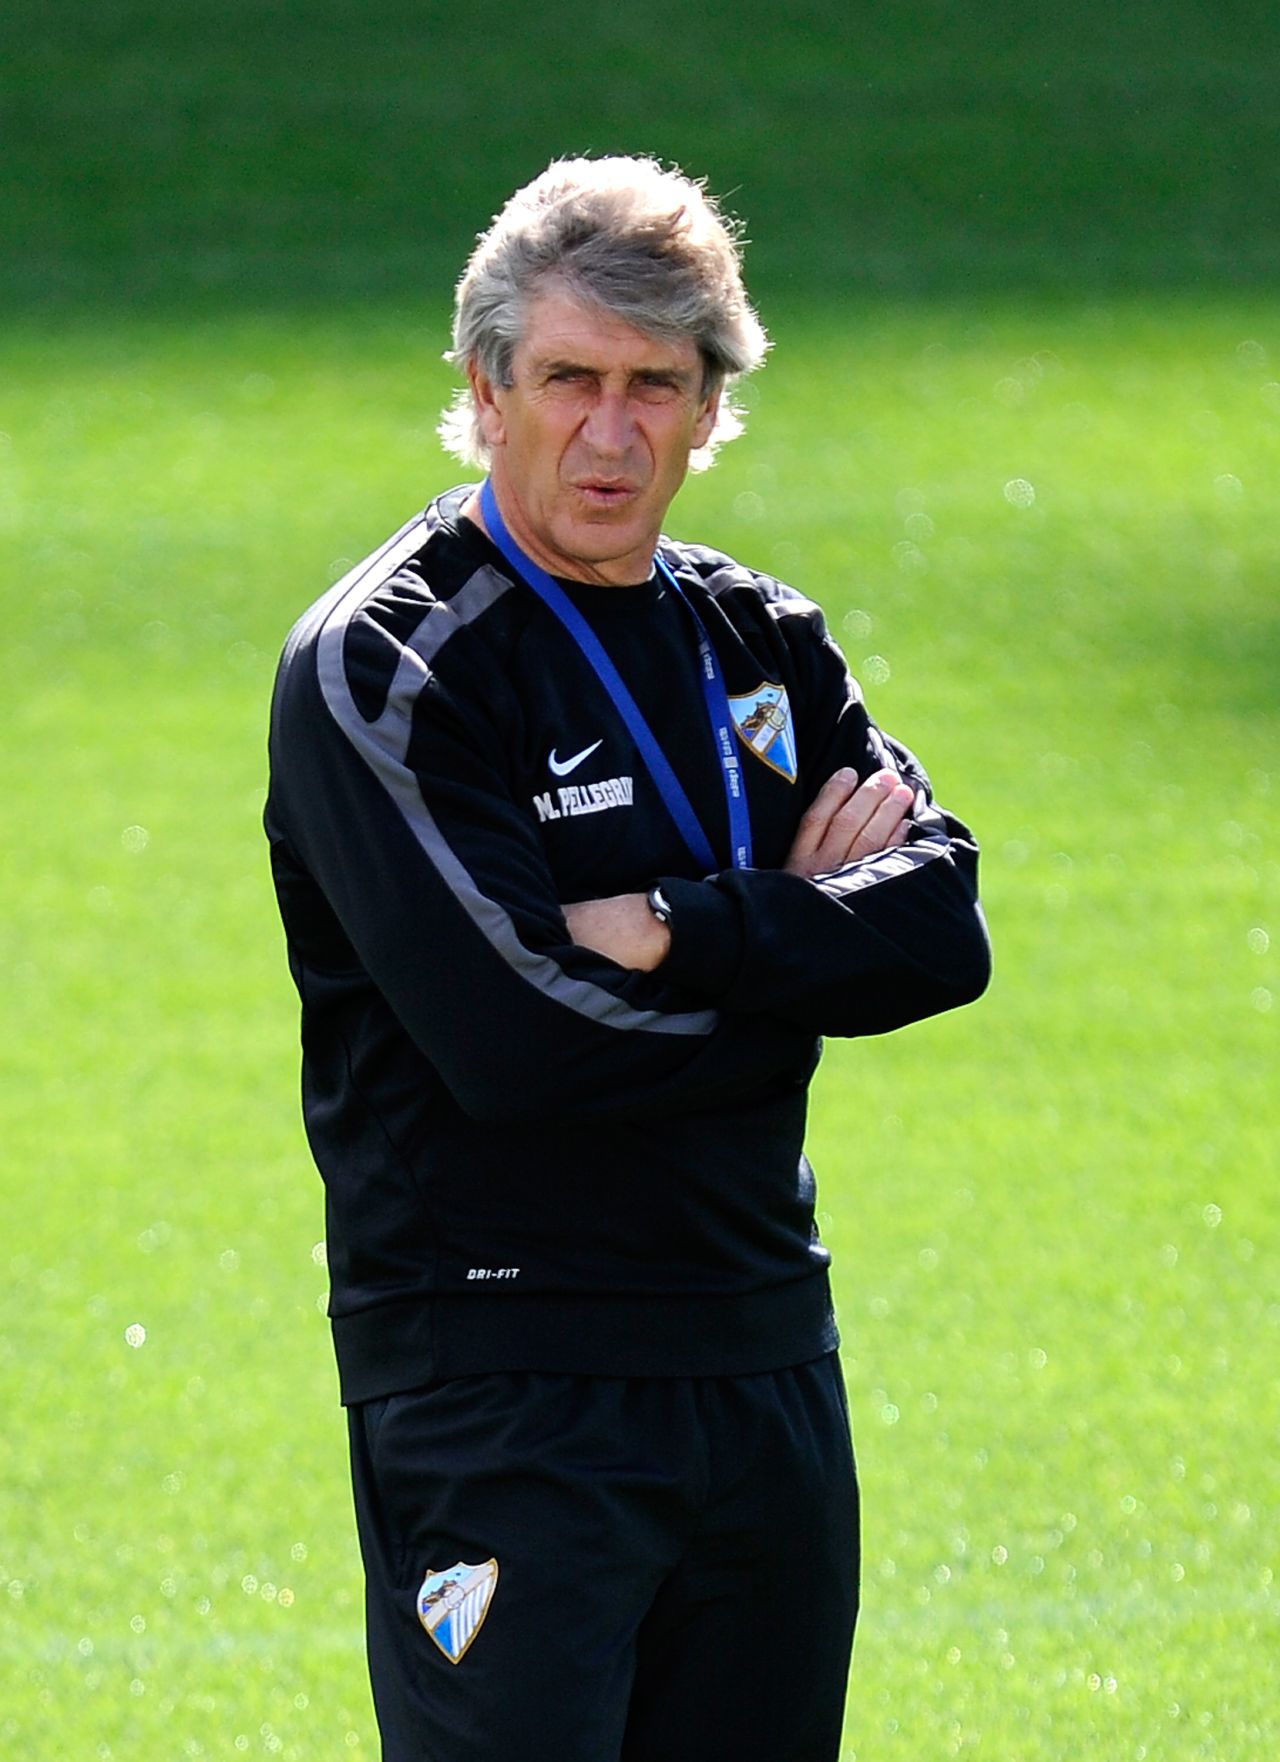 "Manuel shares the club's approach to football and our ambition to achieve on-field success, coordinating with the wider football support teams to ensure natural progression from the academy to senior level," said Manchester City chief executive Ferran Soriano of the club's new manager.